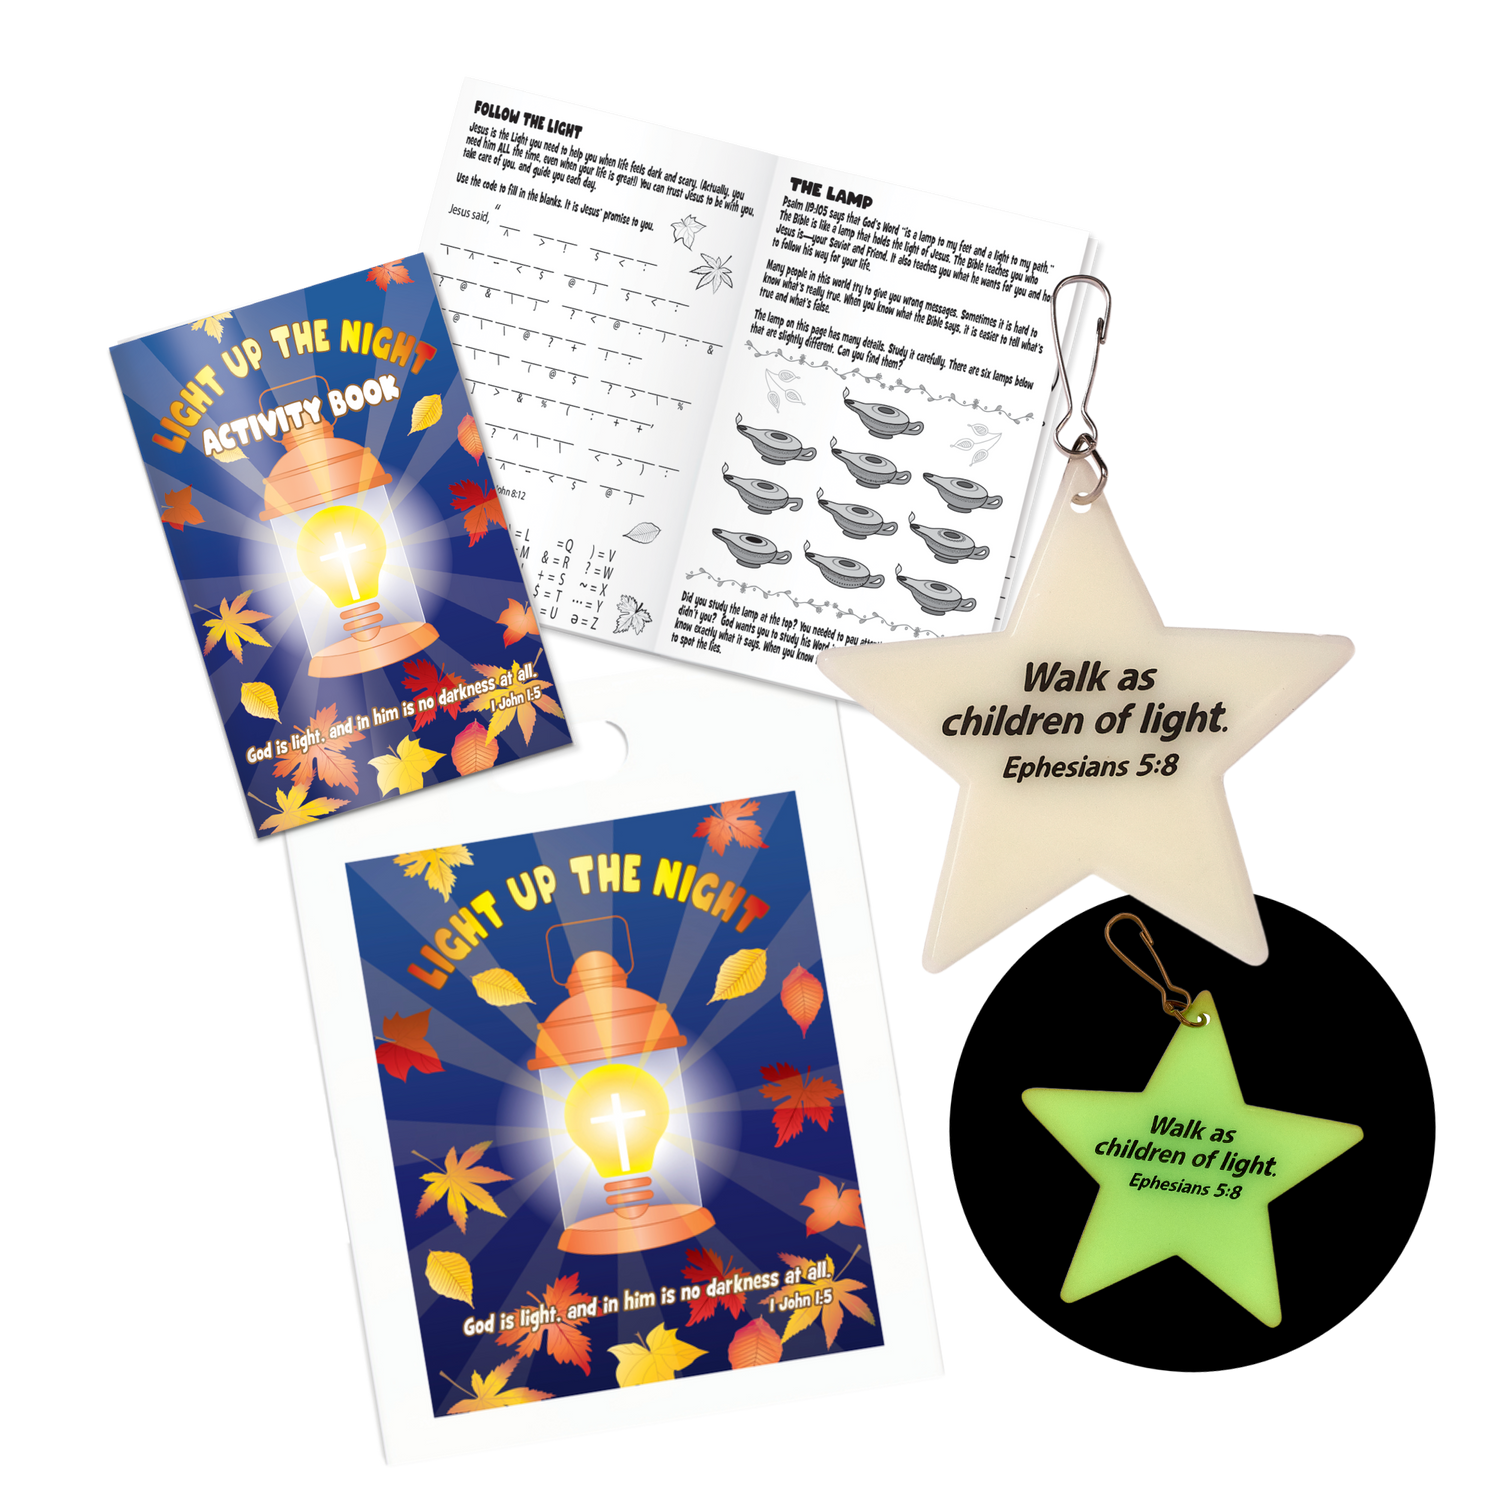 Light Up the Night activity book, glow in the dark backpack tag and goodie bag with Bible verse